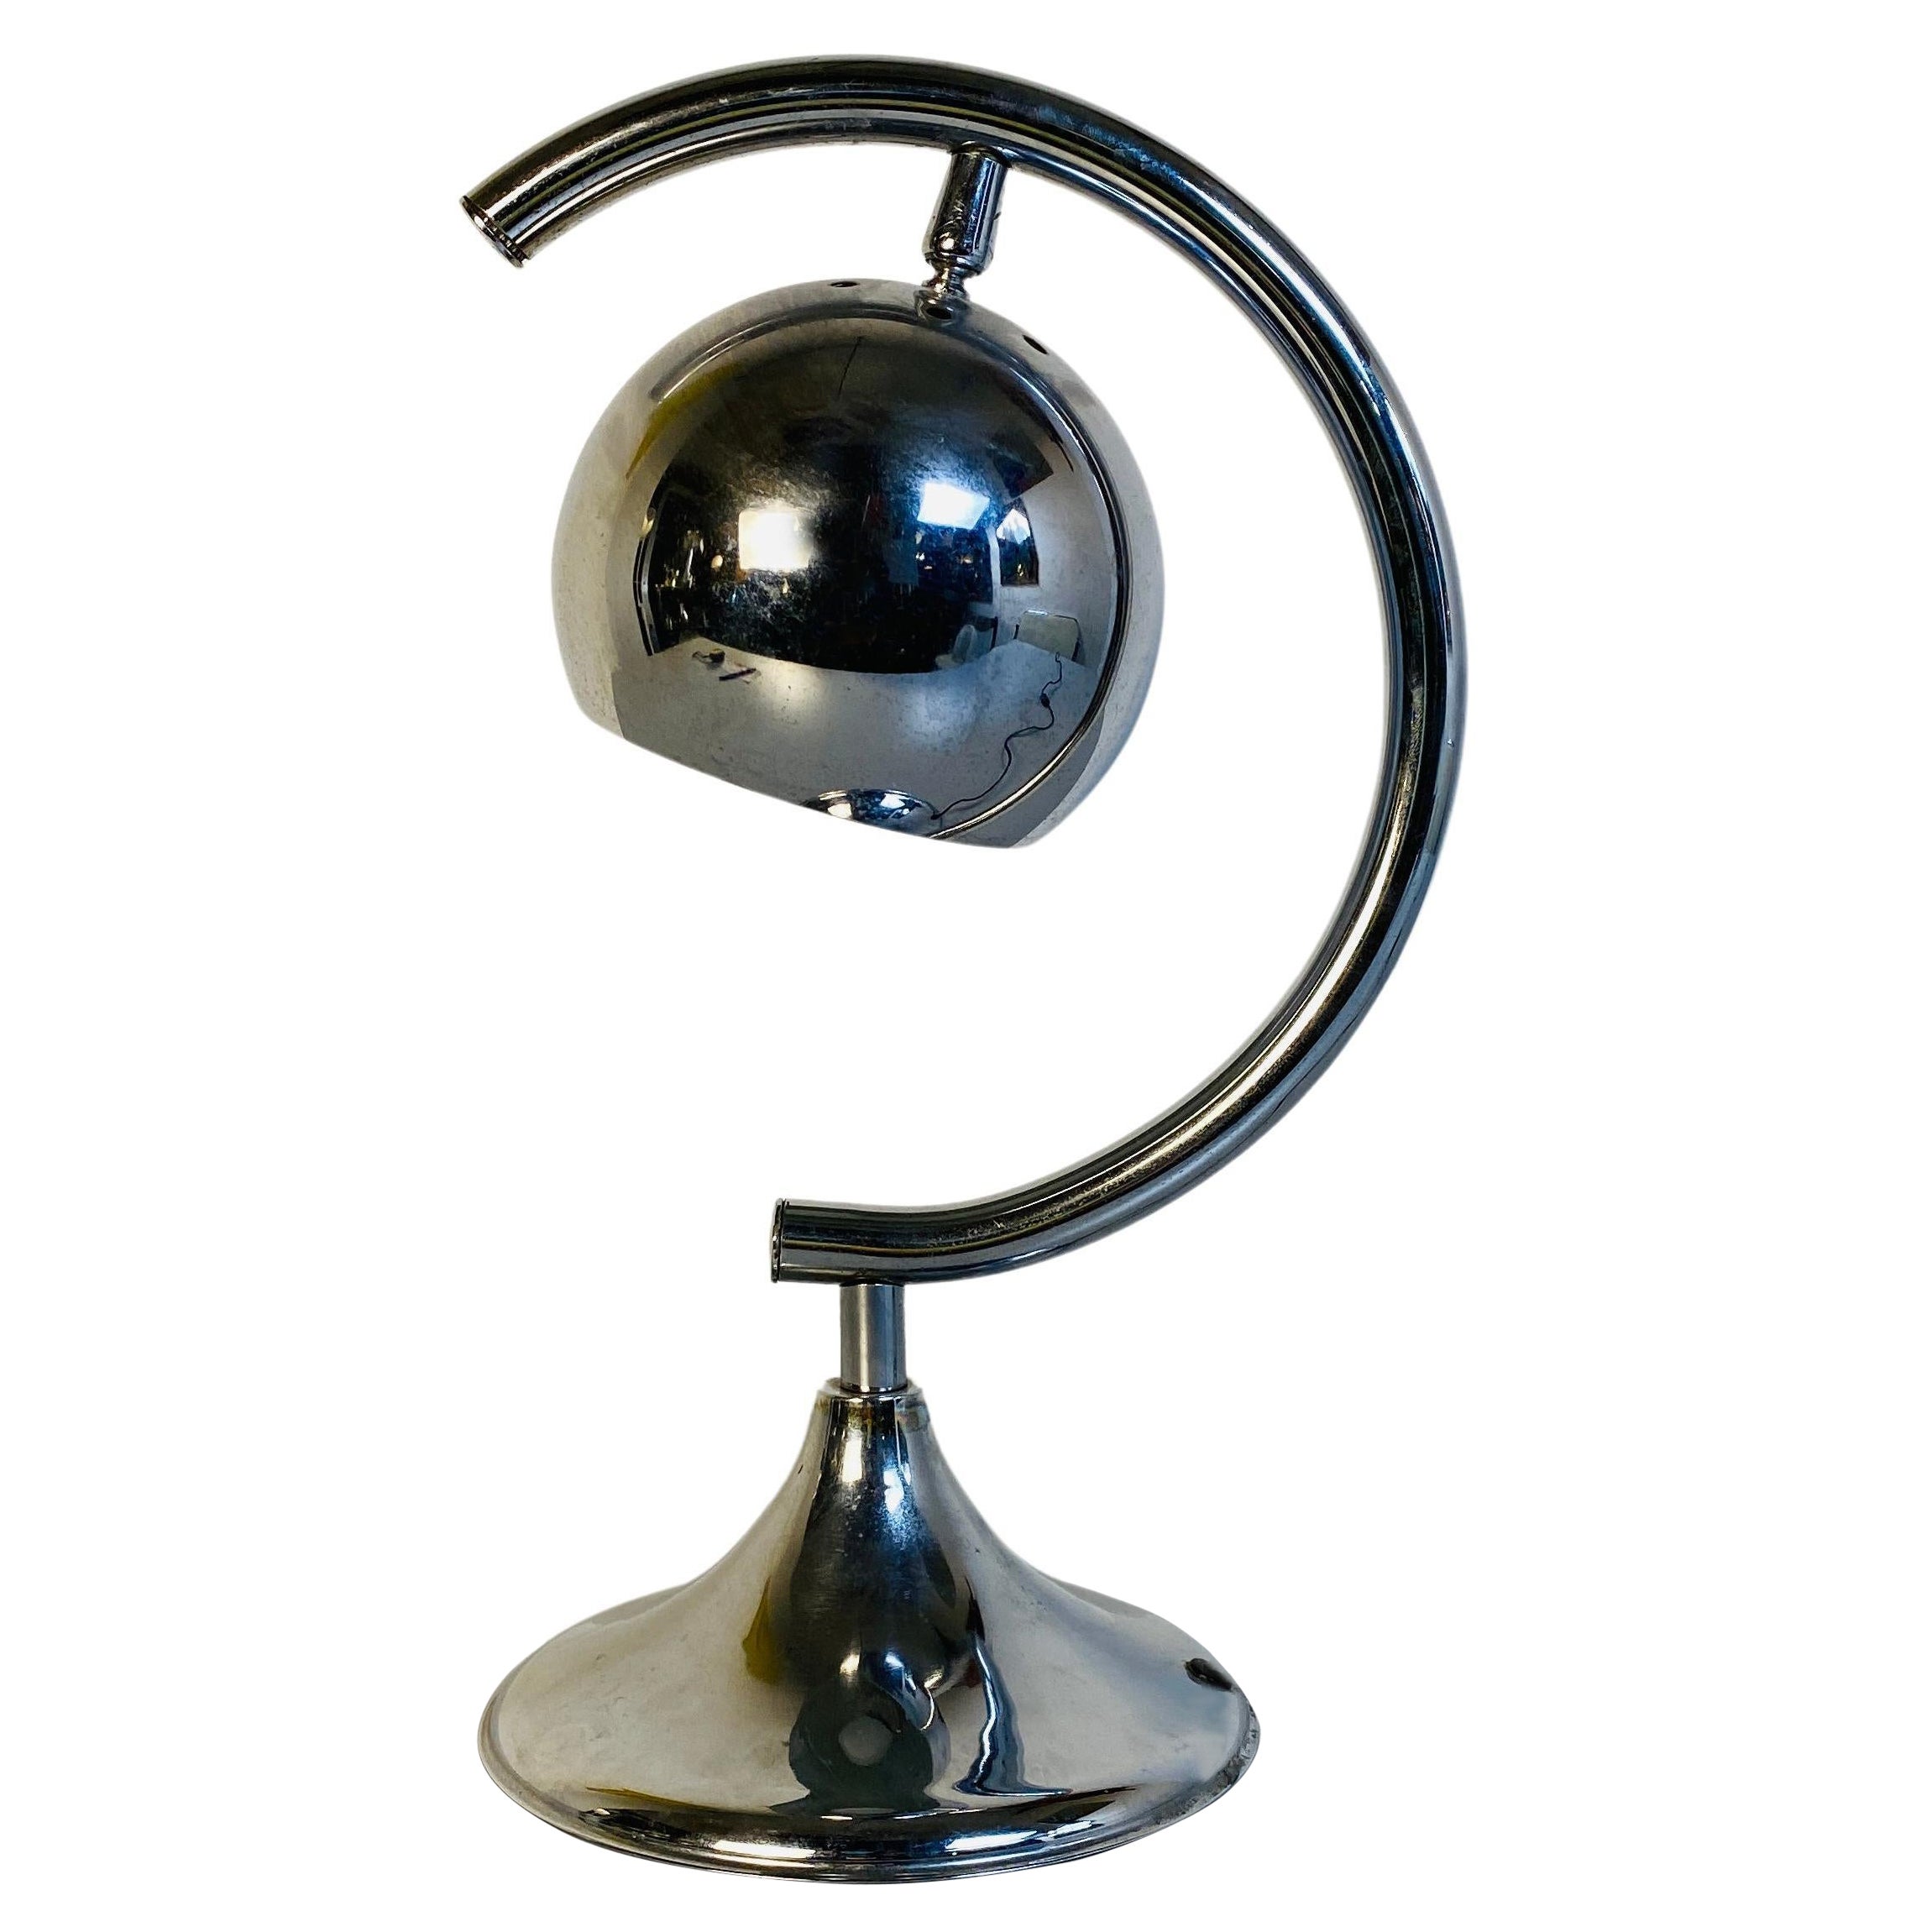 Italian Mid-Century Modern Chrome Table Lamp with Semi-Circular Structure, 1970s For Sale